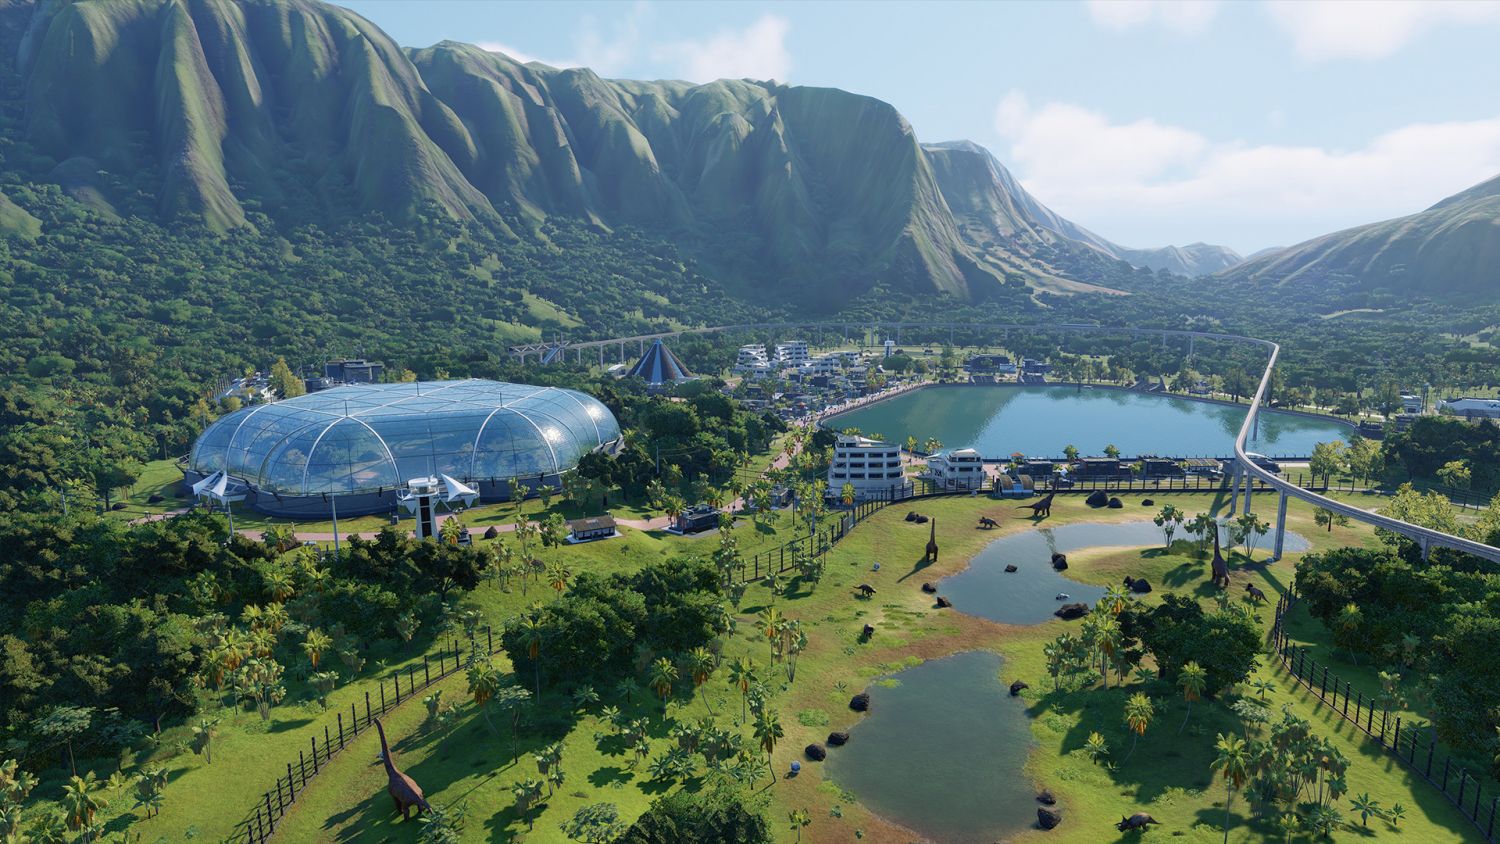 The world awaits your planning and strategy in Jurassic World Evolution 2